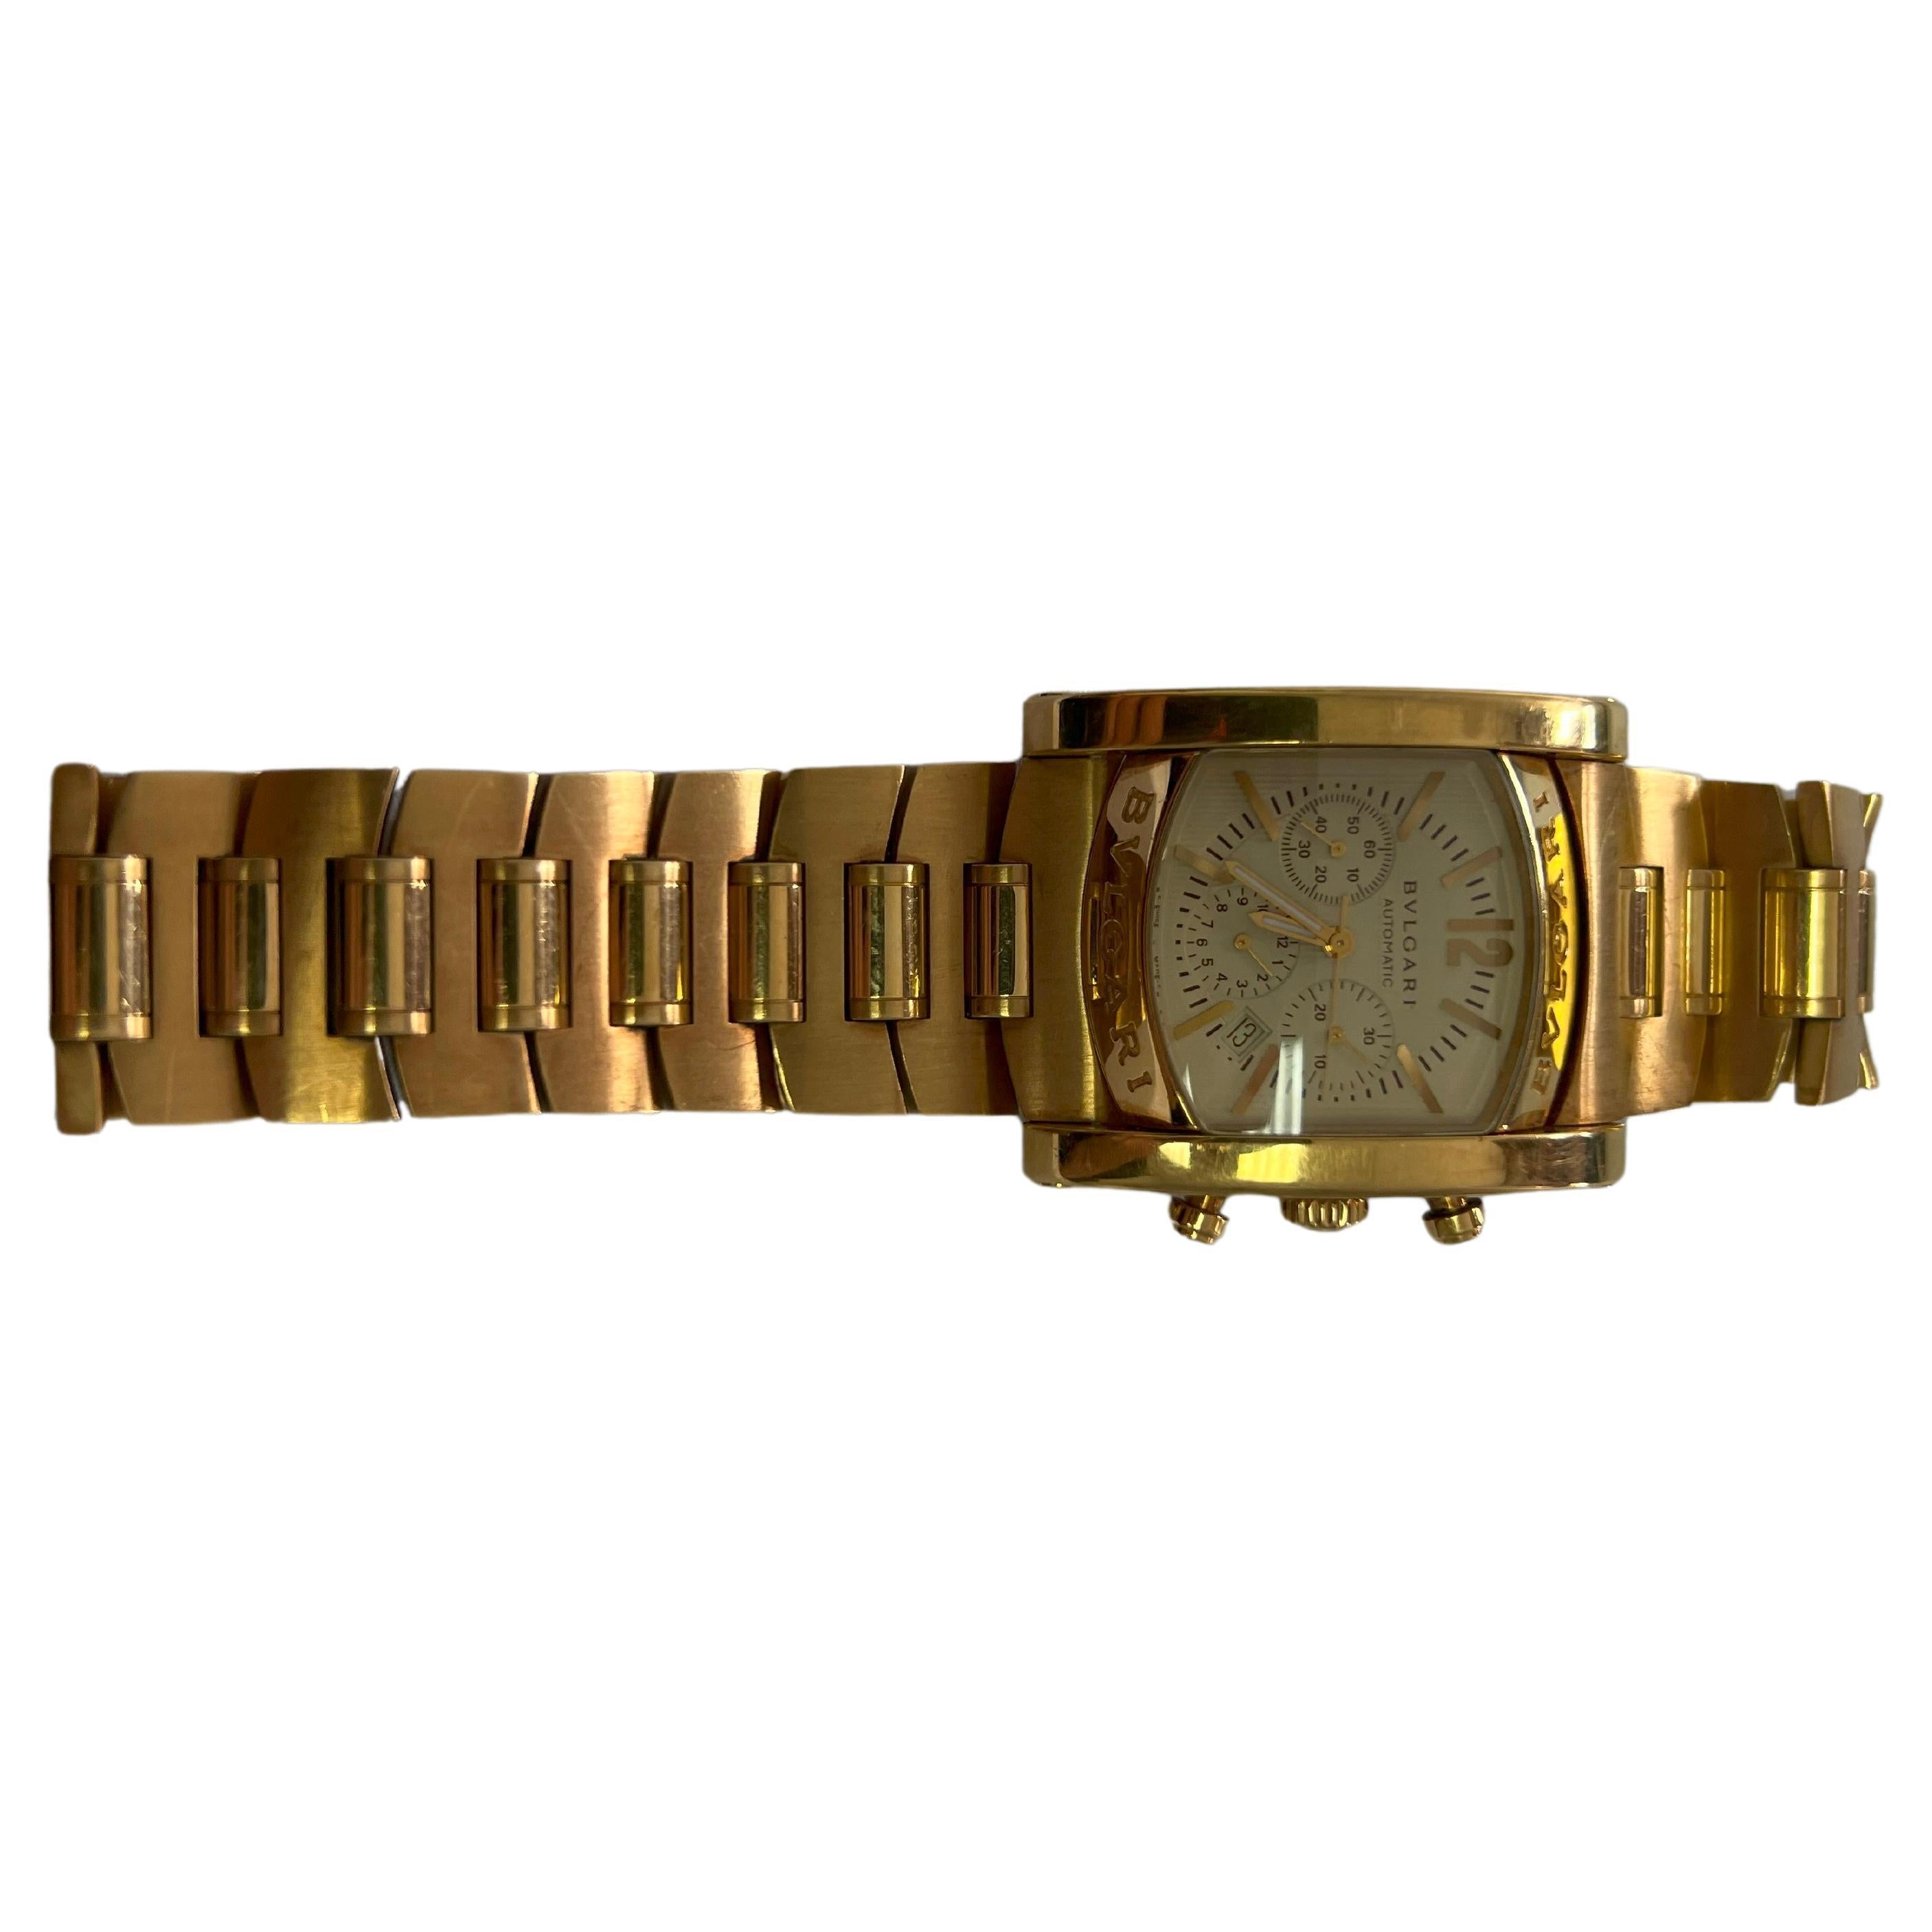 Bvlgari Bulgari Assioma 18 Karat Yellow Gold Large Dial Watch - 209 Grams - 8 inches length
Great Condition
Please take a close look at the photos of the back dial for all engravings and hallmarks